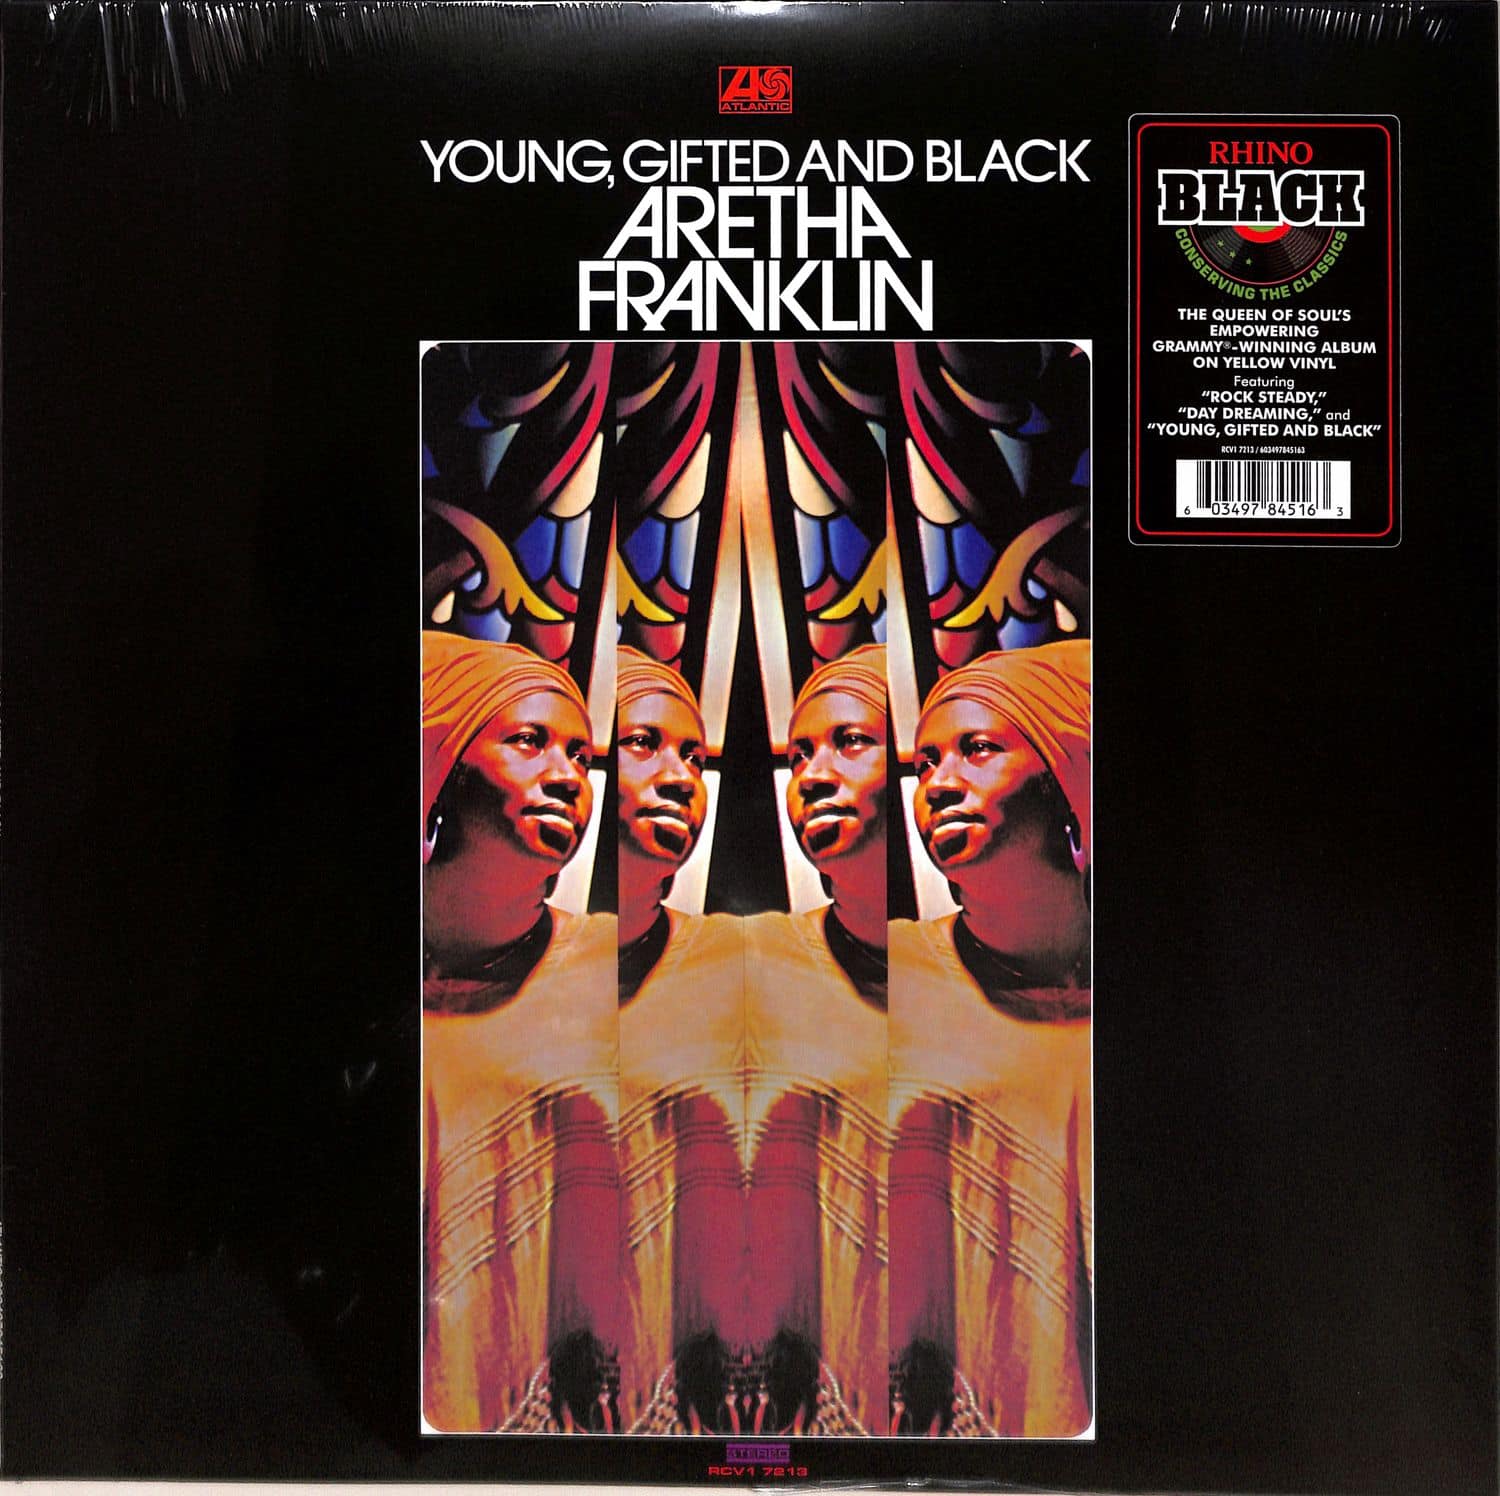 Aretha Franklin - YOUNG, GIFTED AND BLACK 